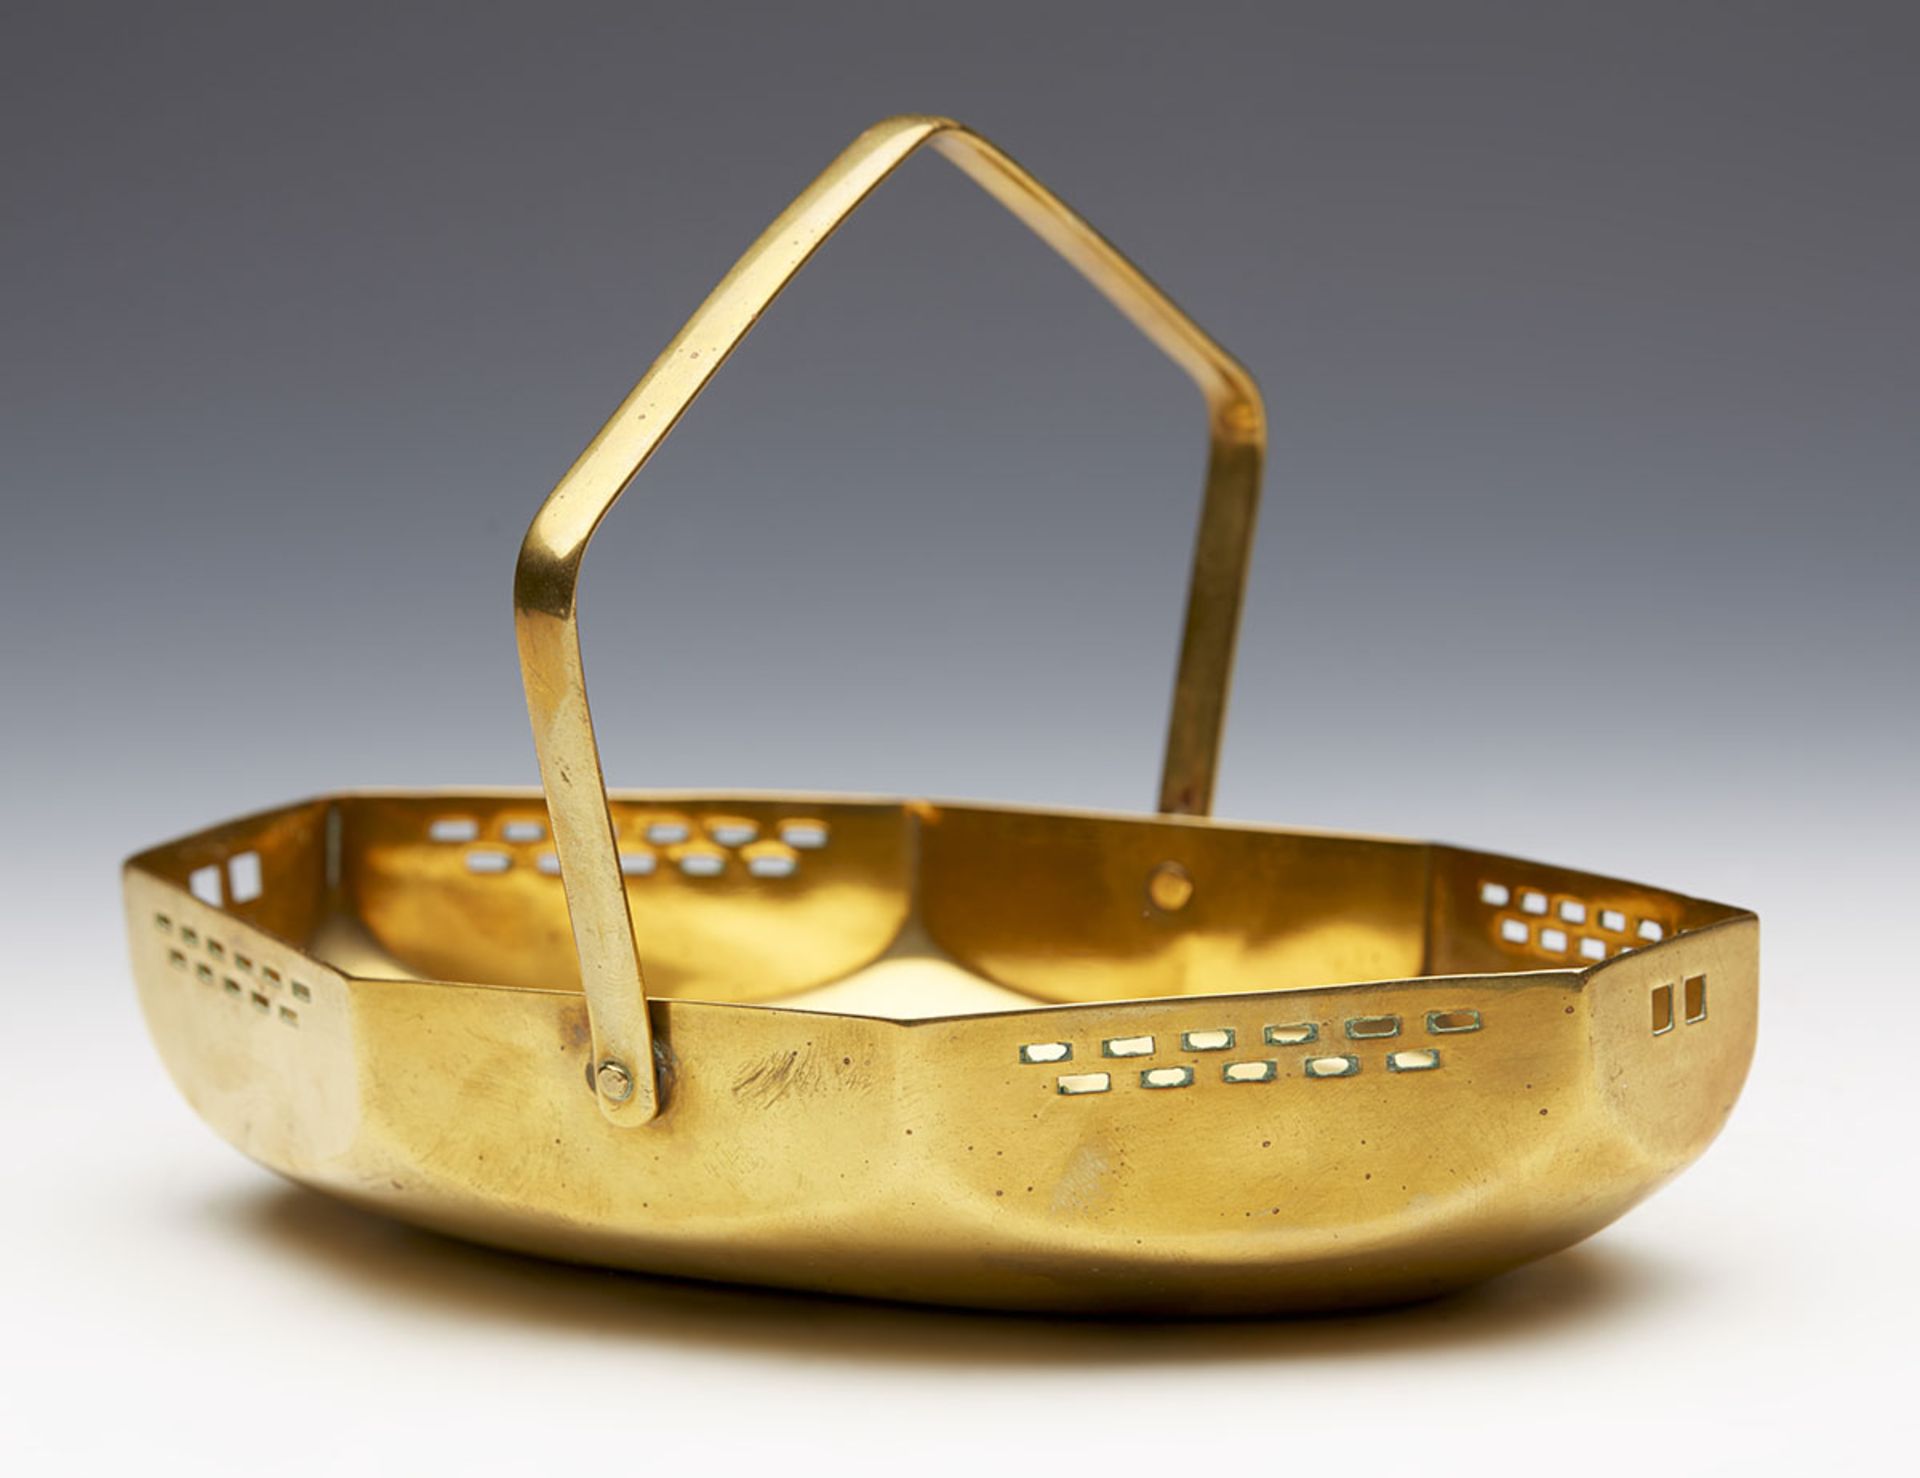 WMF SECESSIONIST HANDLED PIERCED BRASS BASKET c.1900   DIMENSIONS   Height 11,5cm, Length 17cm - Image 8 of 8